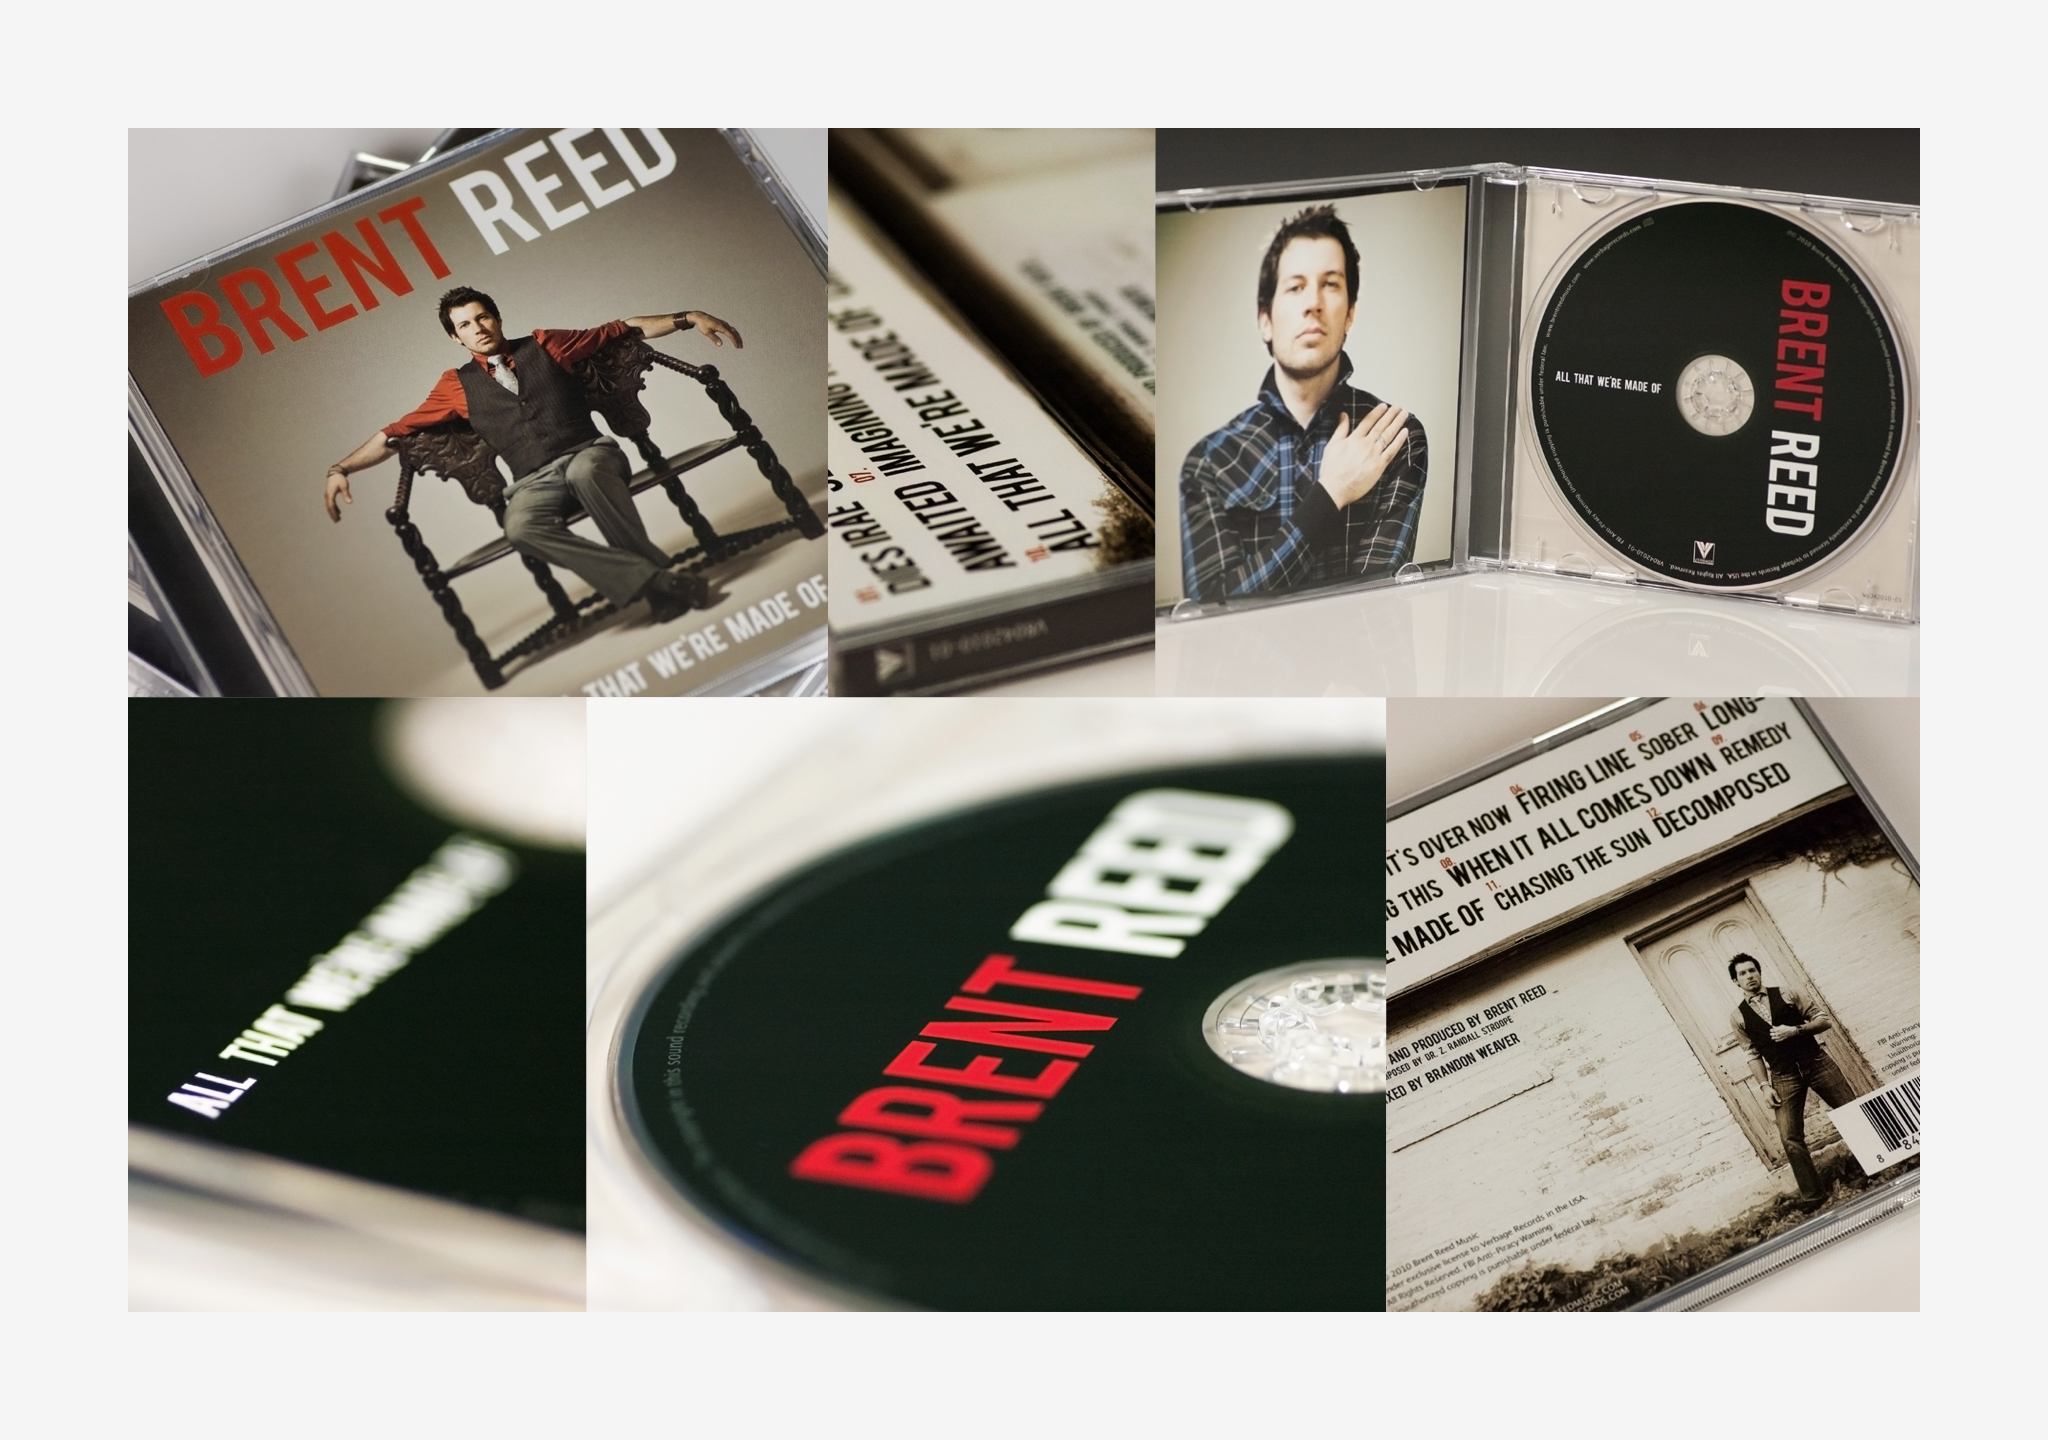 Featured-Brent-Reed-CD-Packaging